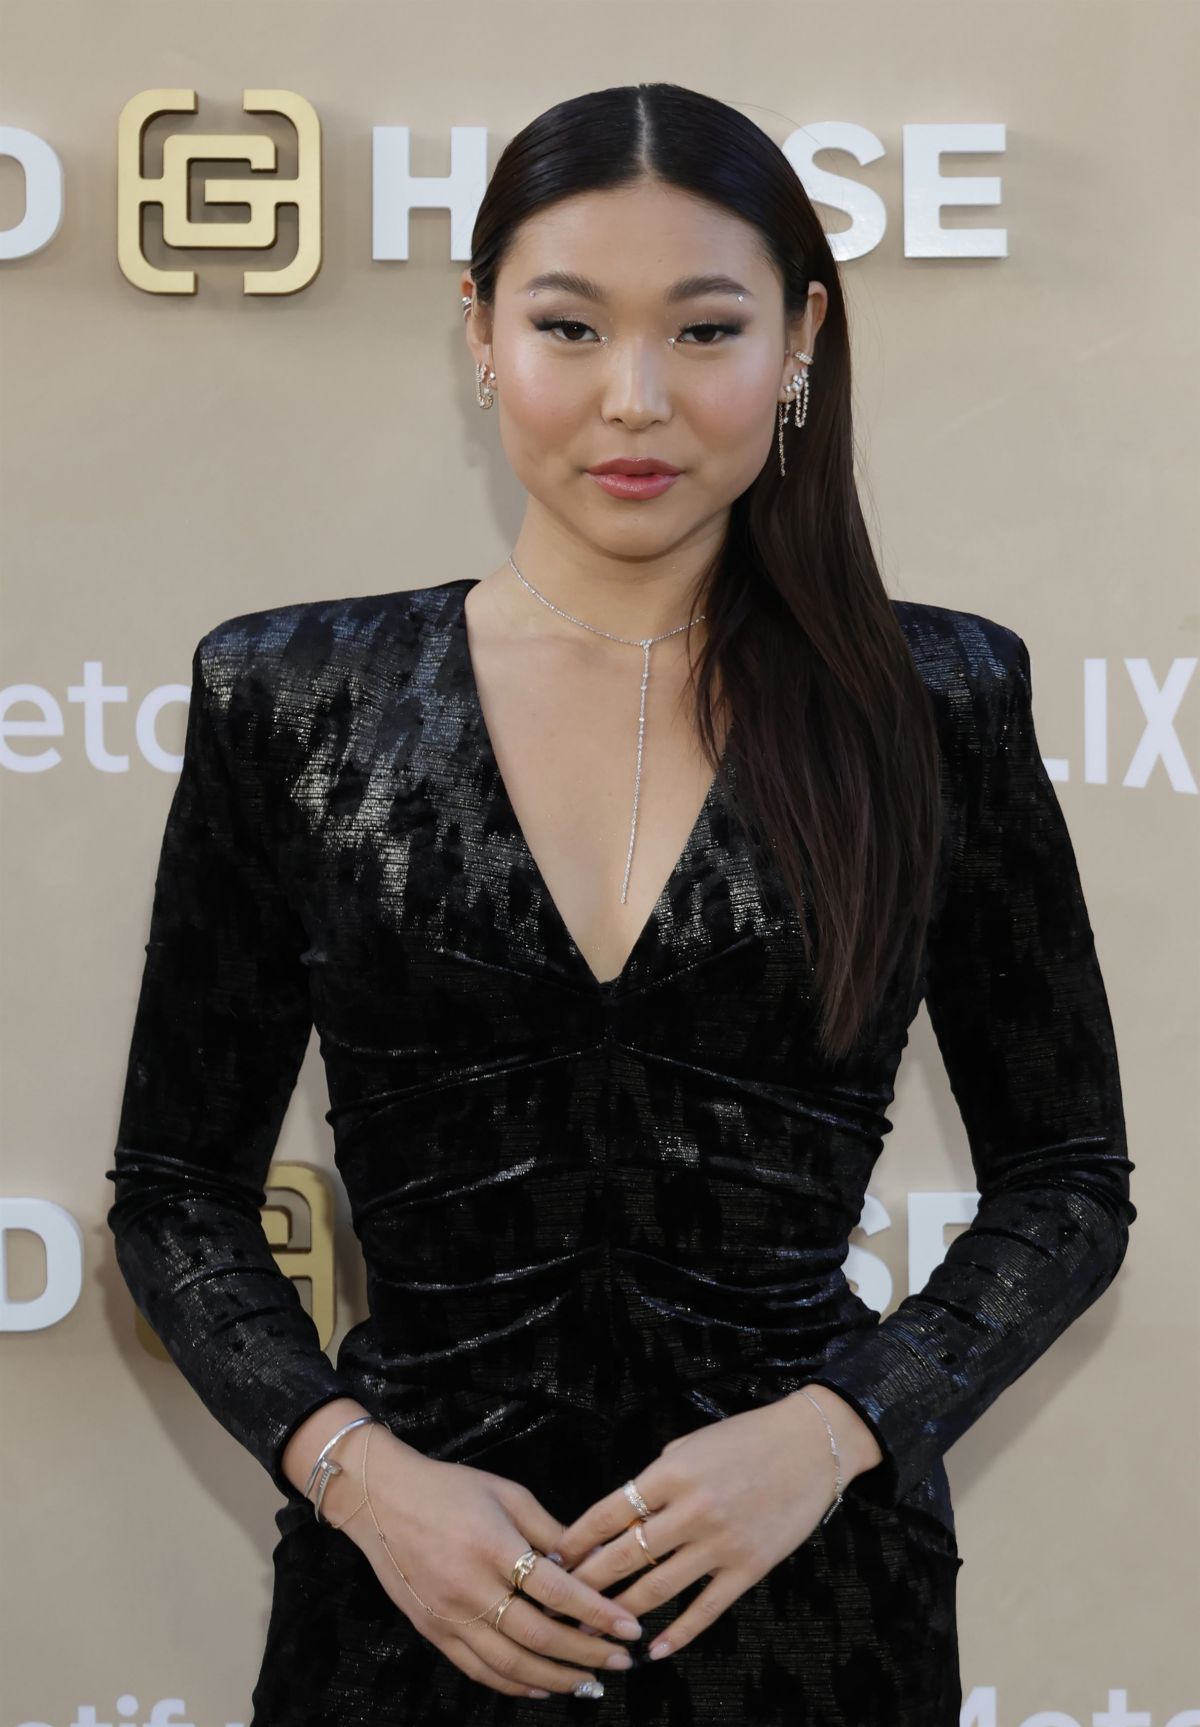 CHLOE KIM at Gold House’s 2nd Annual Gold Gala at The Music Center in